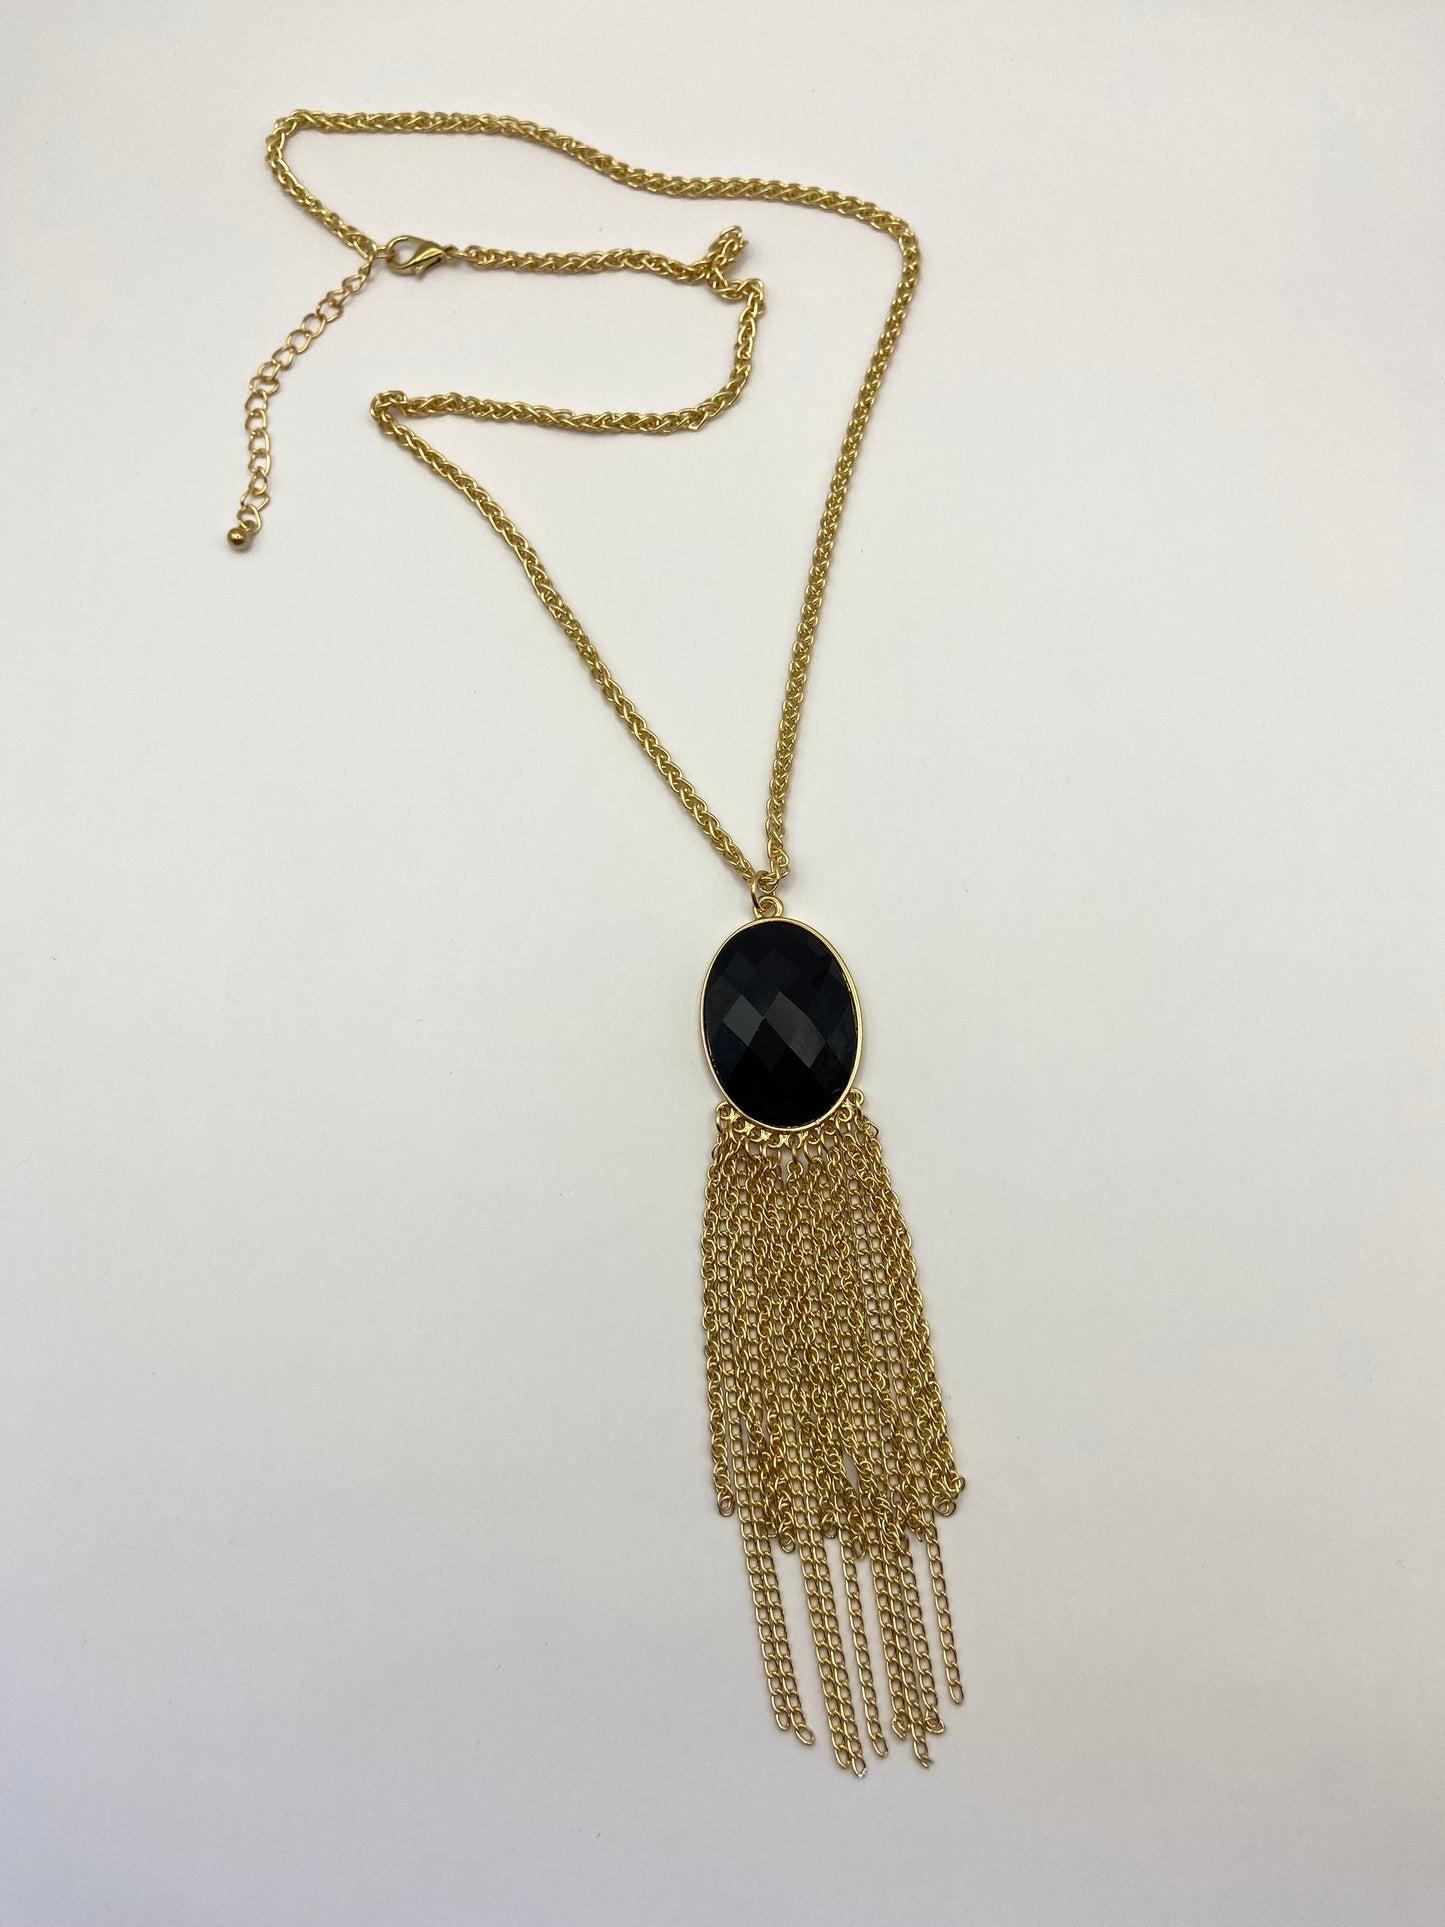 Goldtone necklace with pendant